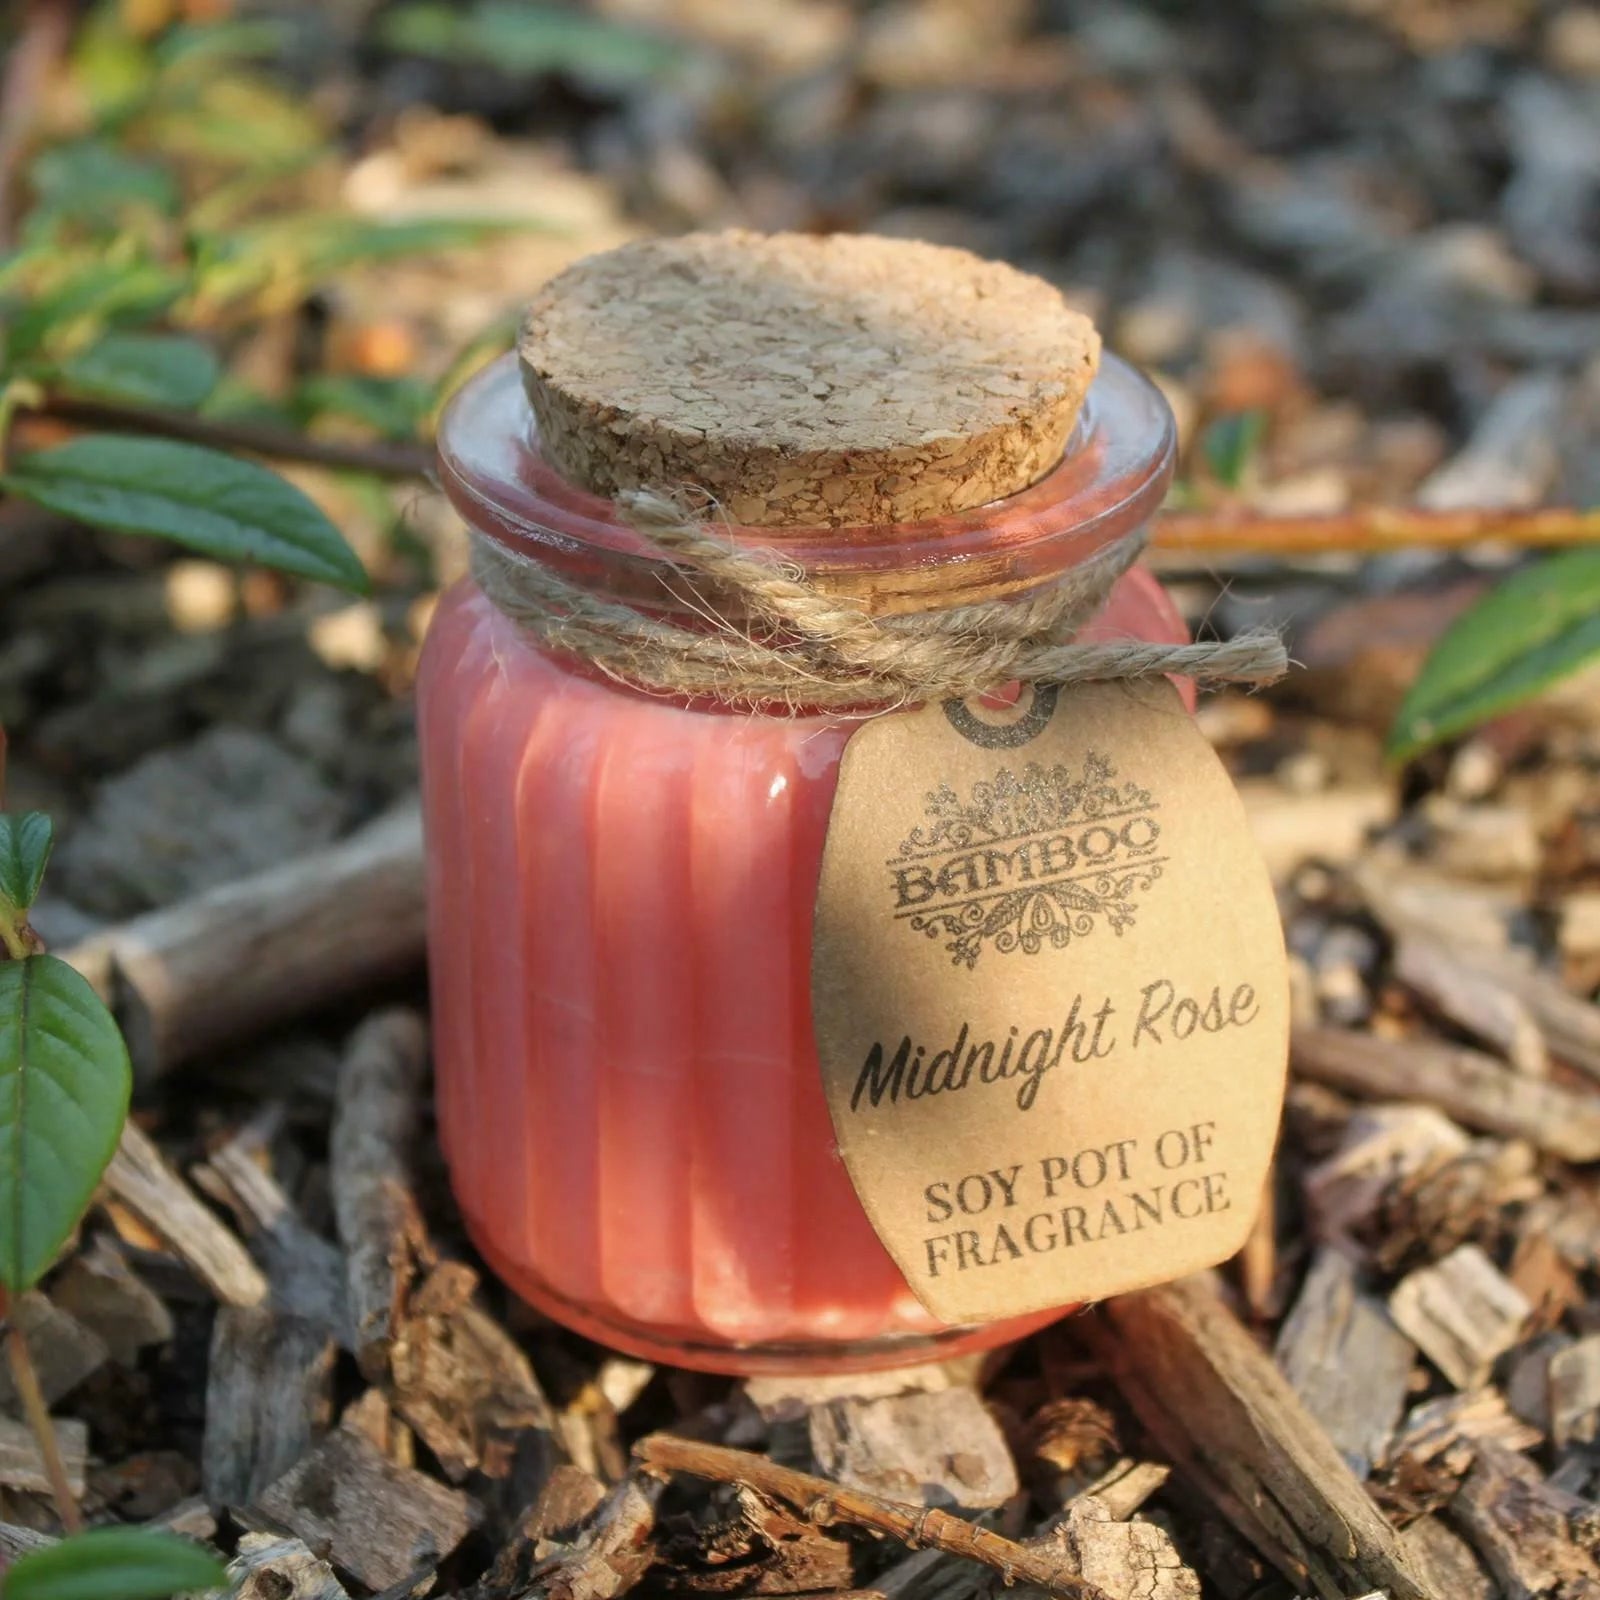 Midnight Rose Soy Pot Of Fragrance Candles - Ancient Wisdom